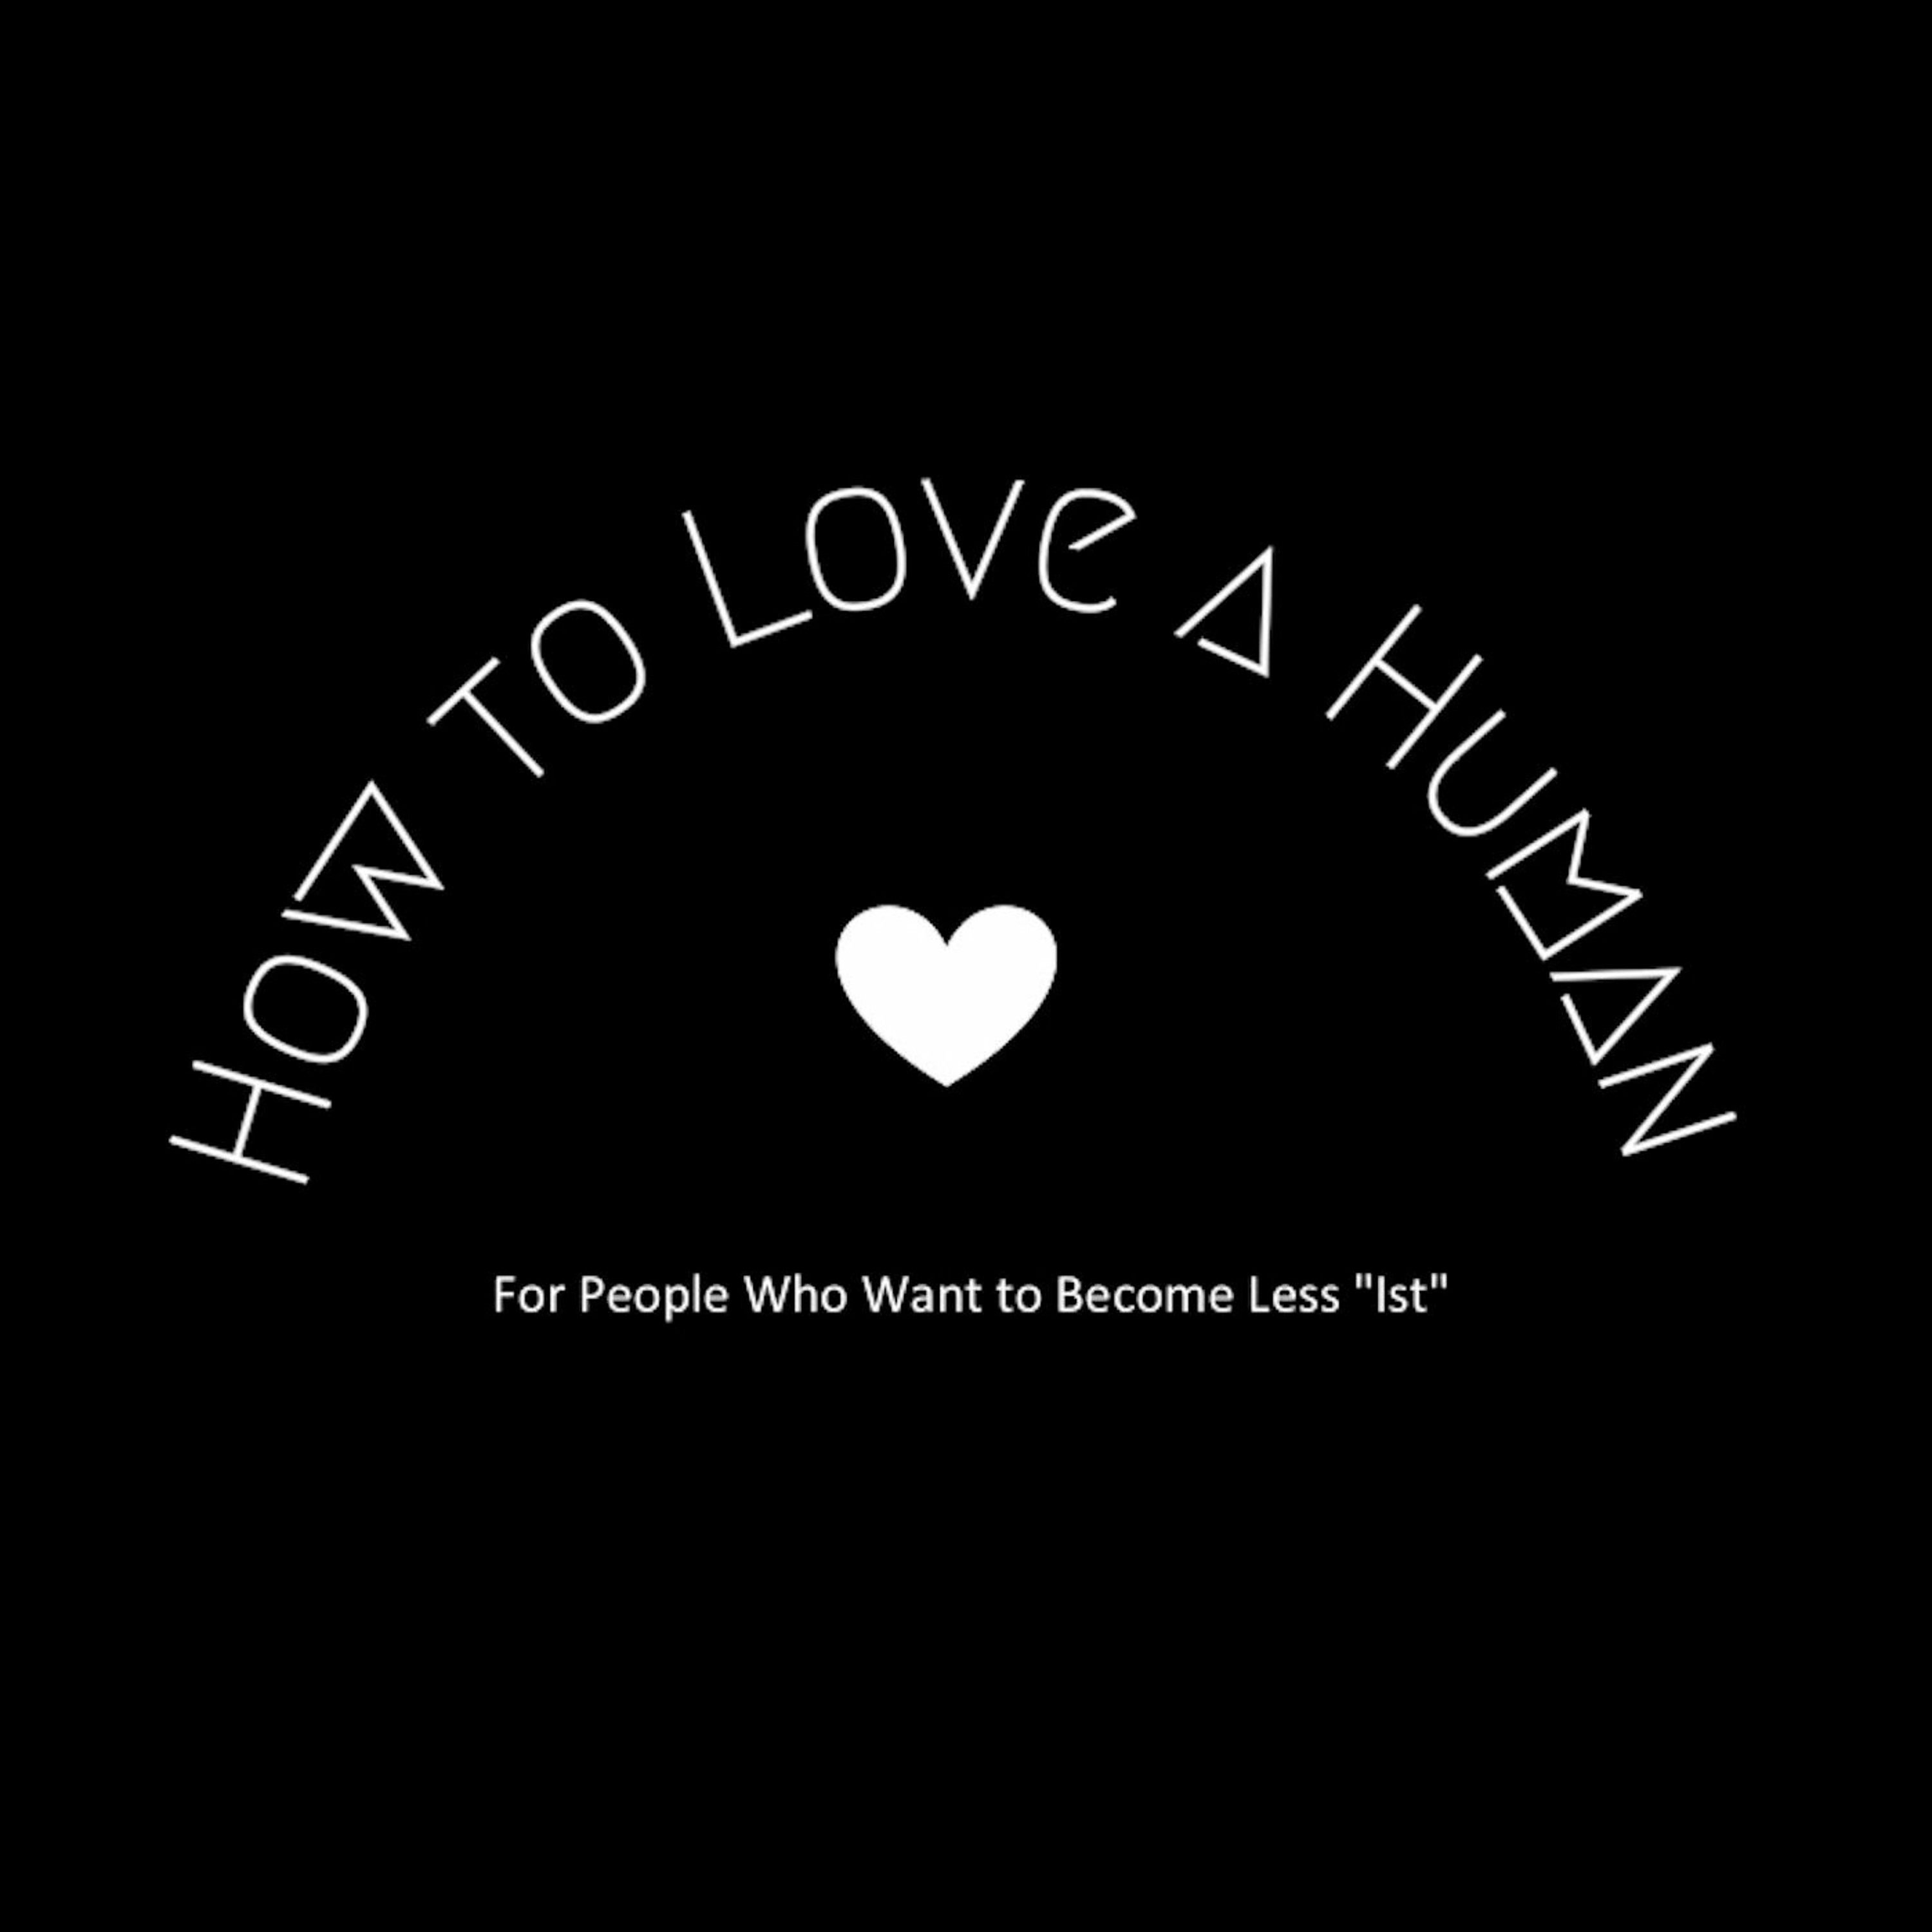 How to Love a Human Episode 10 - Bedford